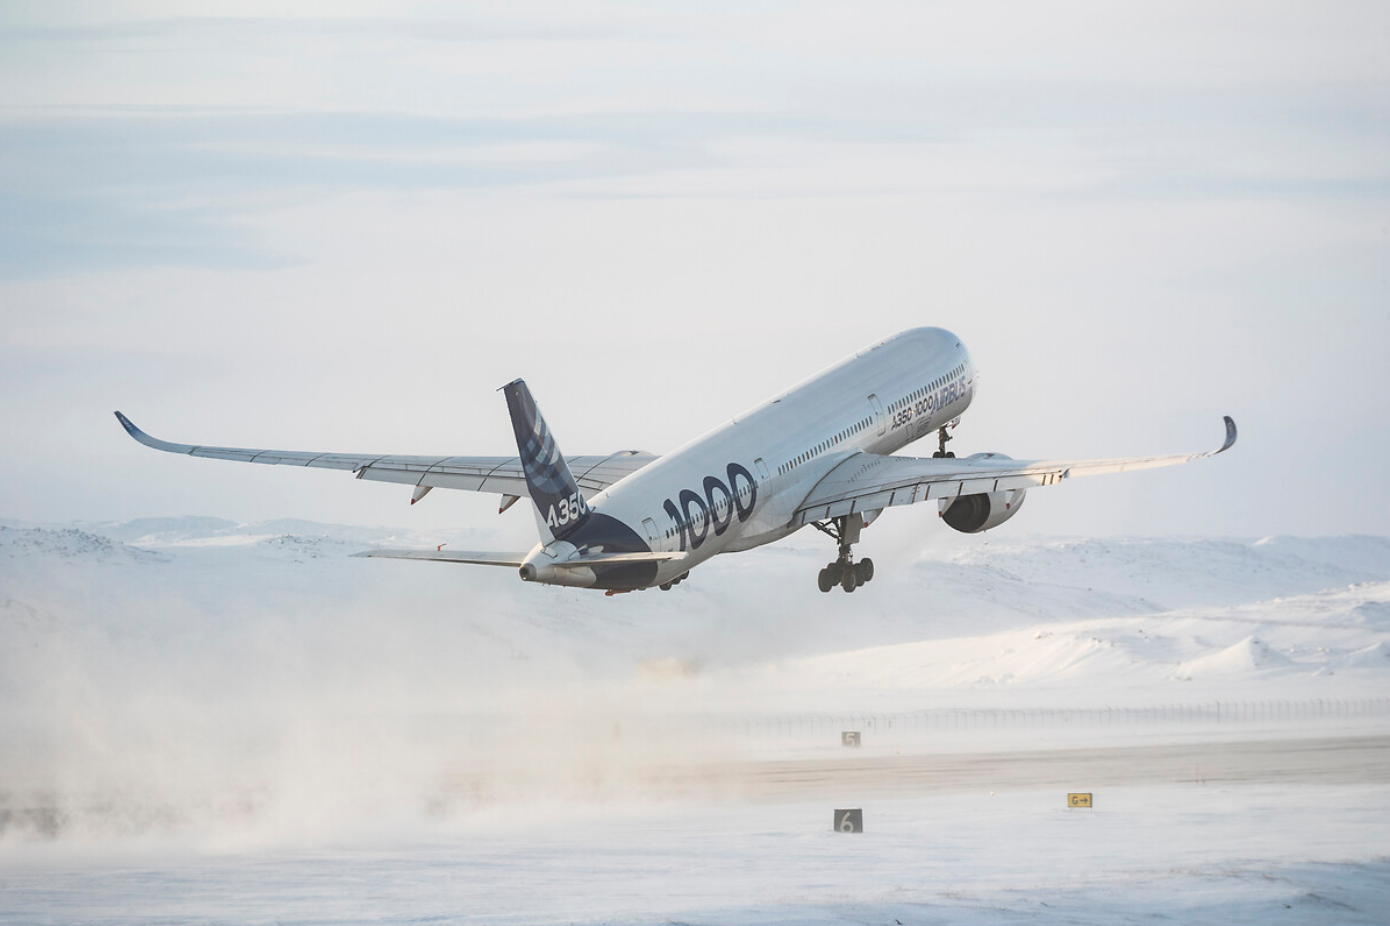 An Airbus A350 takes off in snowy conditions.